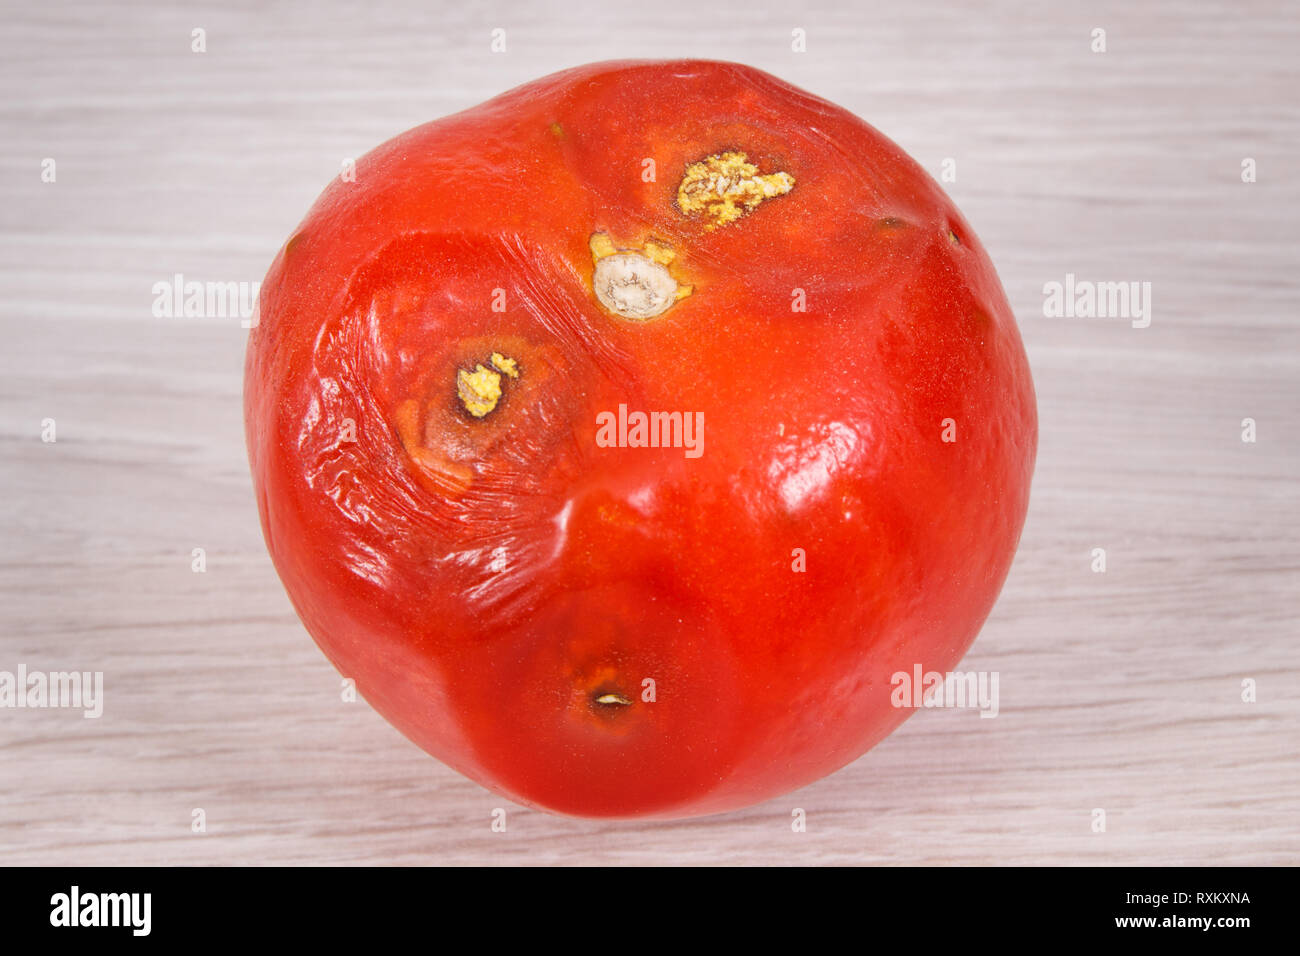 https://c8.alamy.com/comp/RXKXNA/old-wrinkled-moldy-tomato-on-board-unhealthy-and-disgusting-eating-RXKXNA.jpg